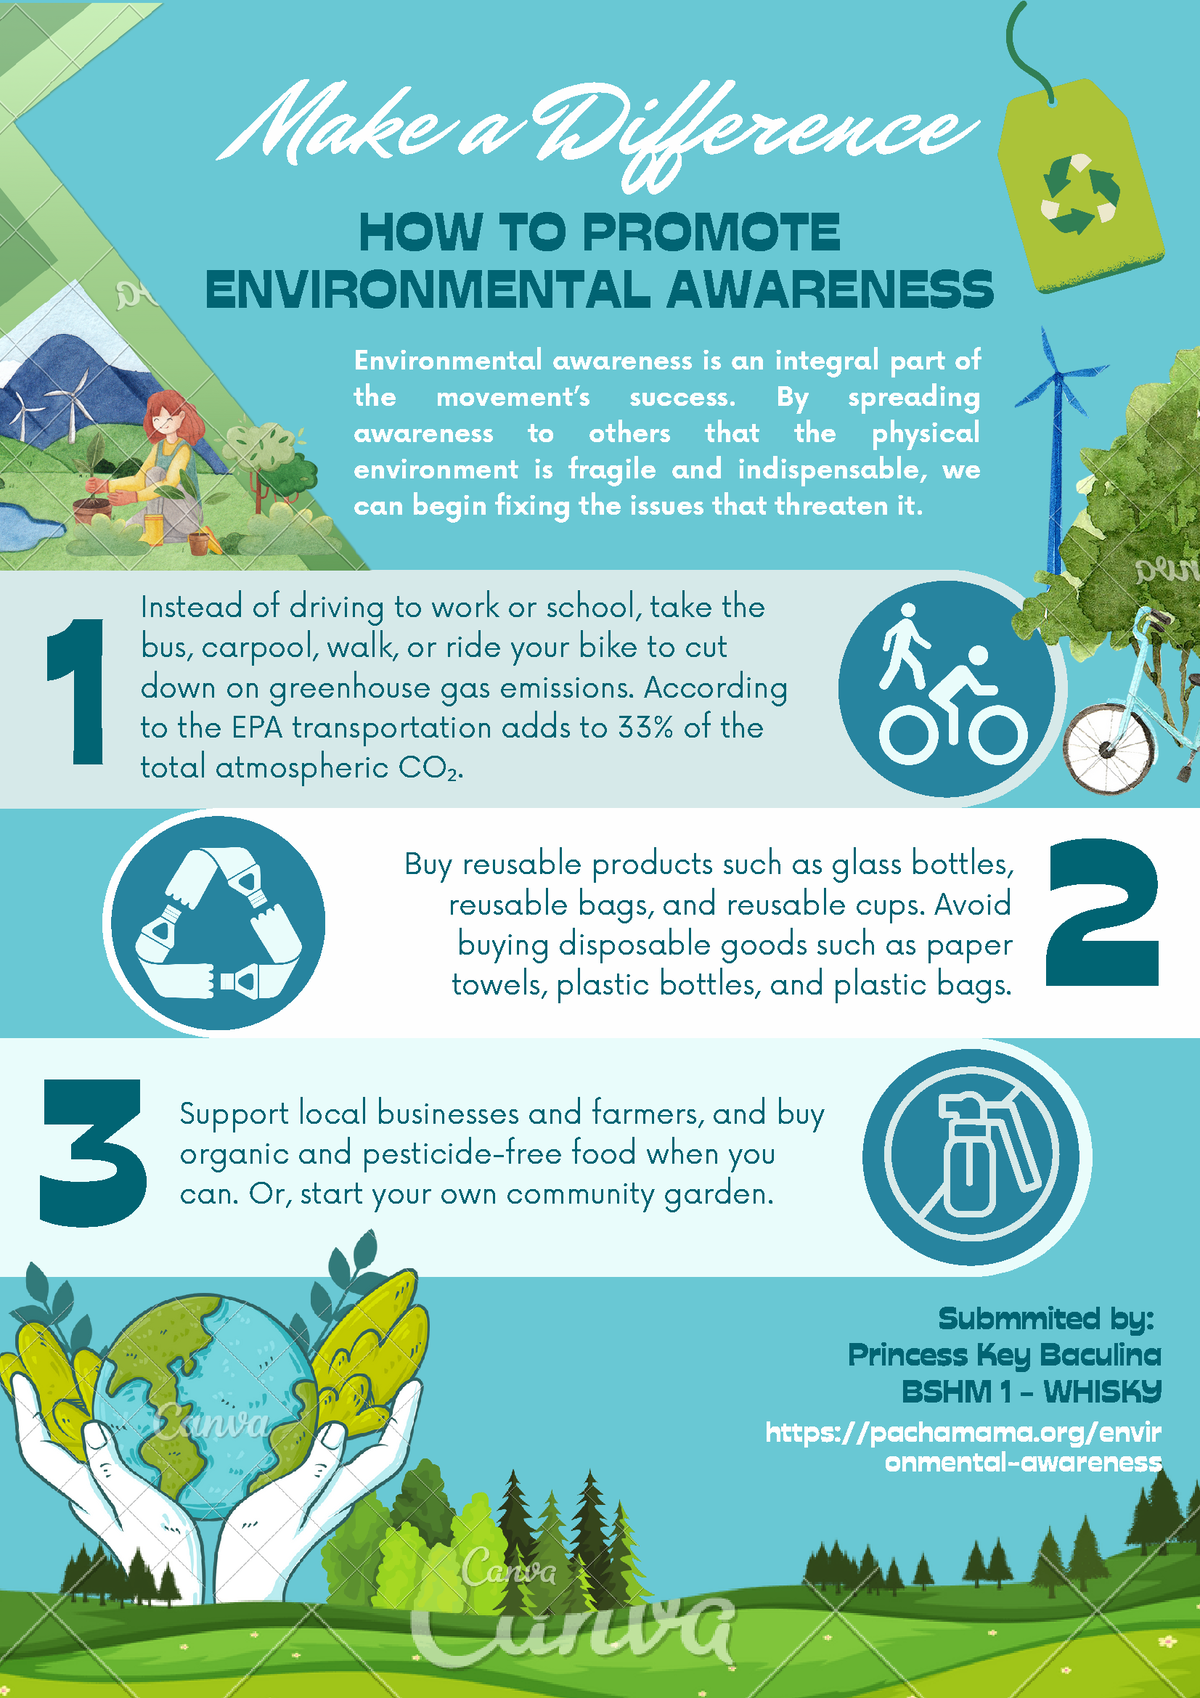 research article on environmental awareness